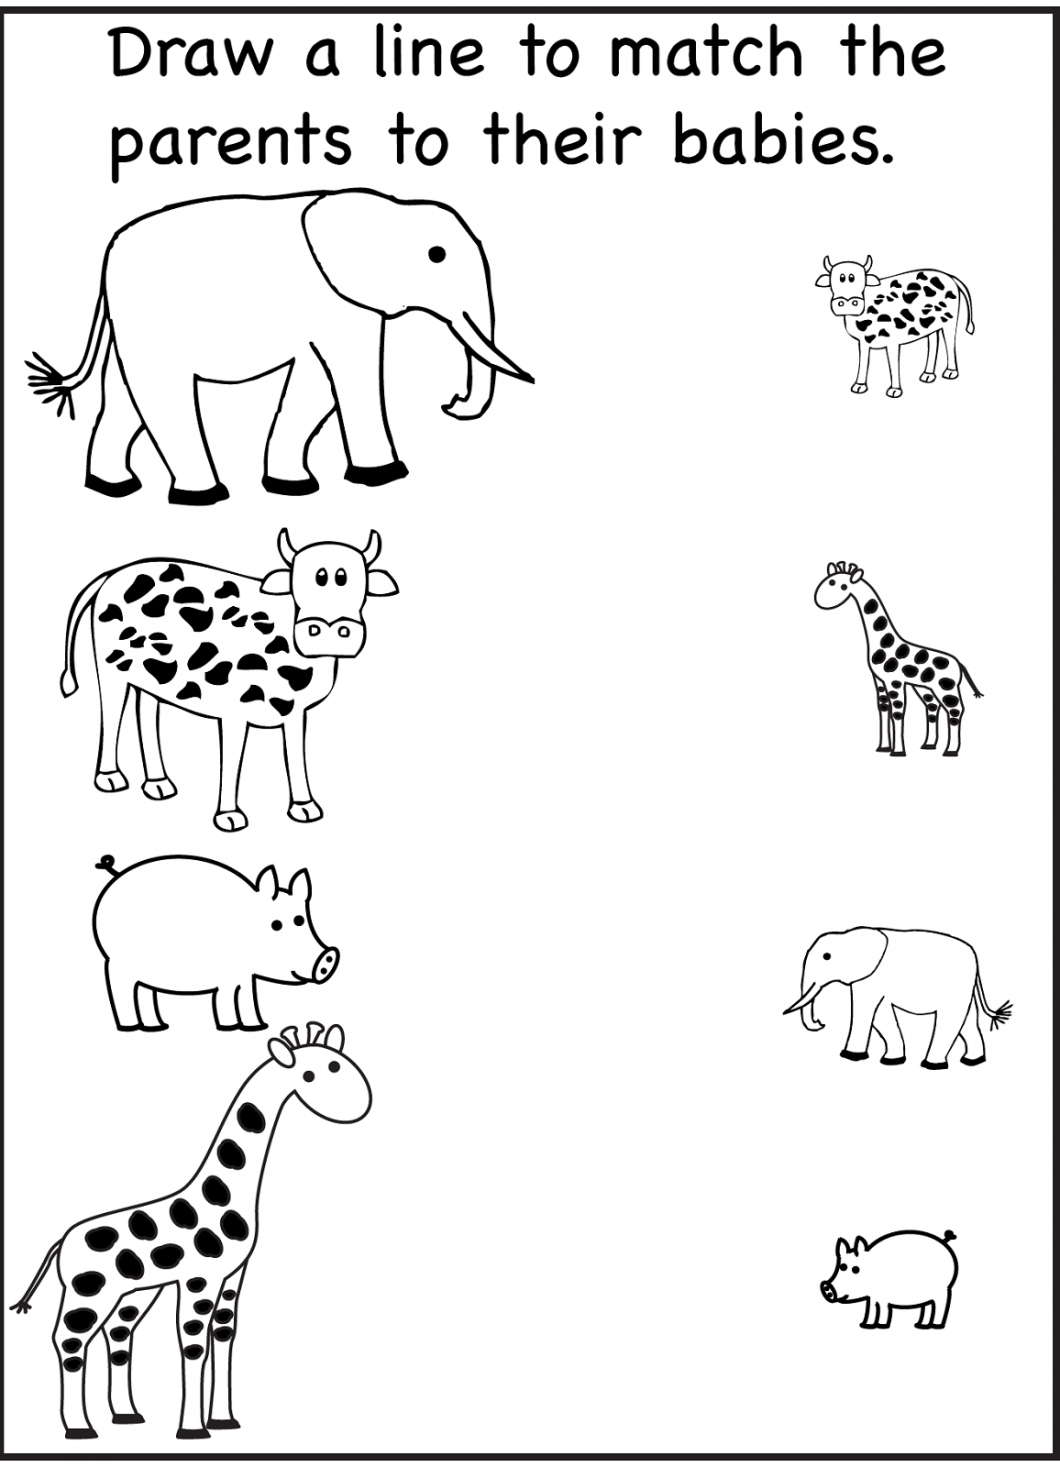 Free Printable Activity Sheets – With Activities For Preschoolers - Free Printable Games For Toddlers